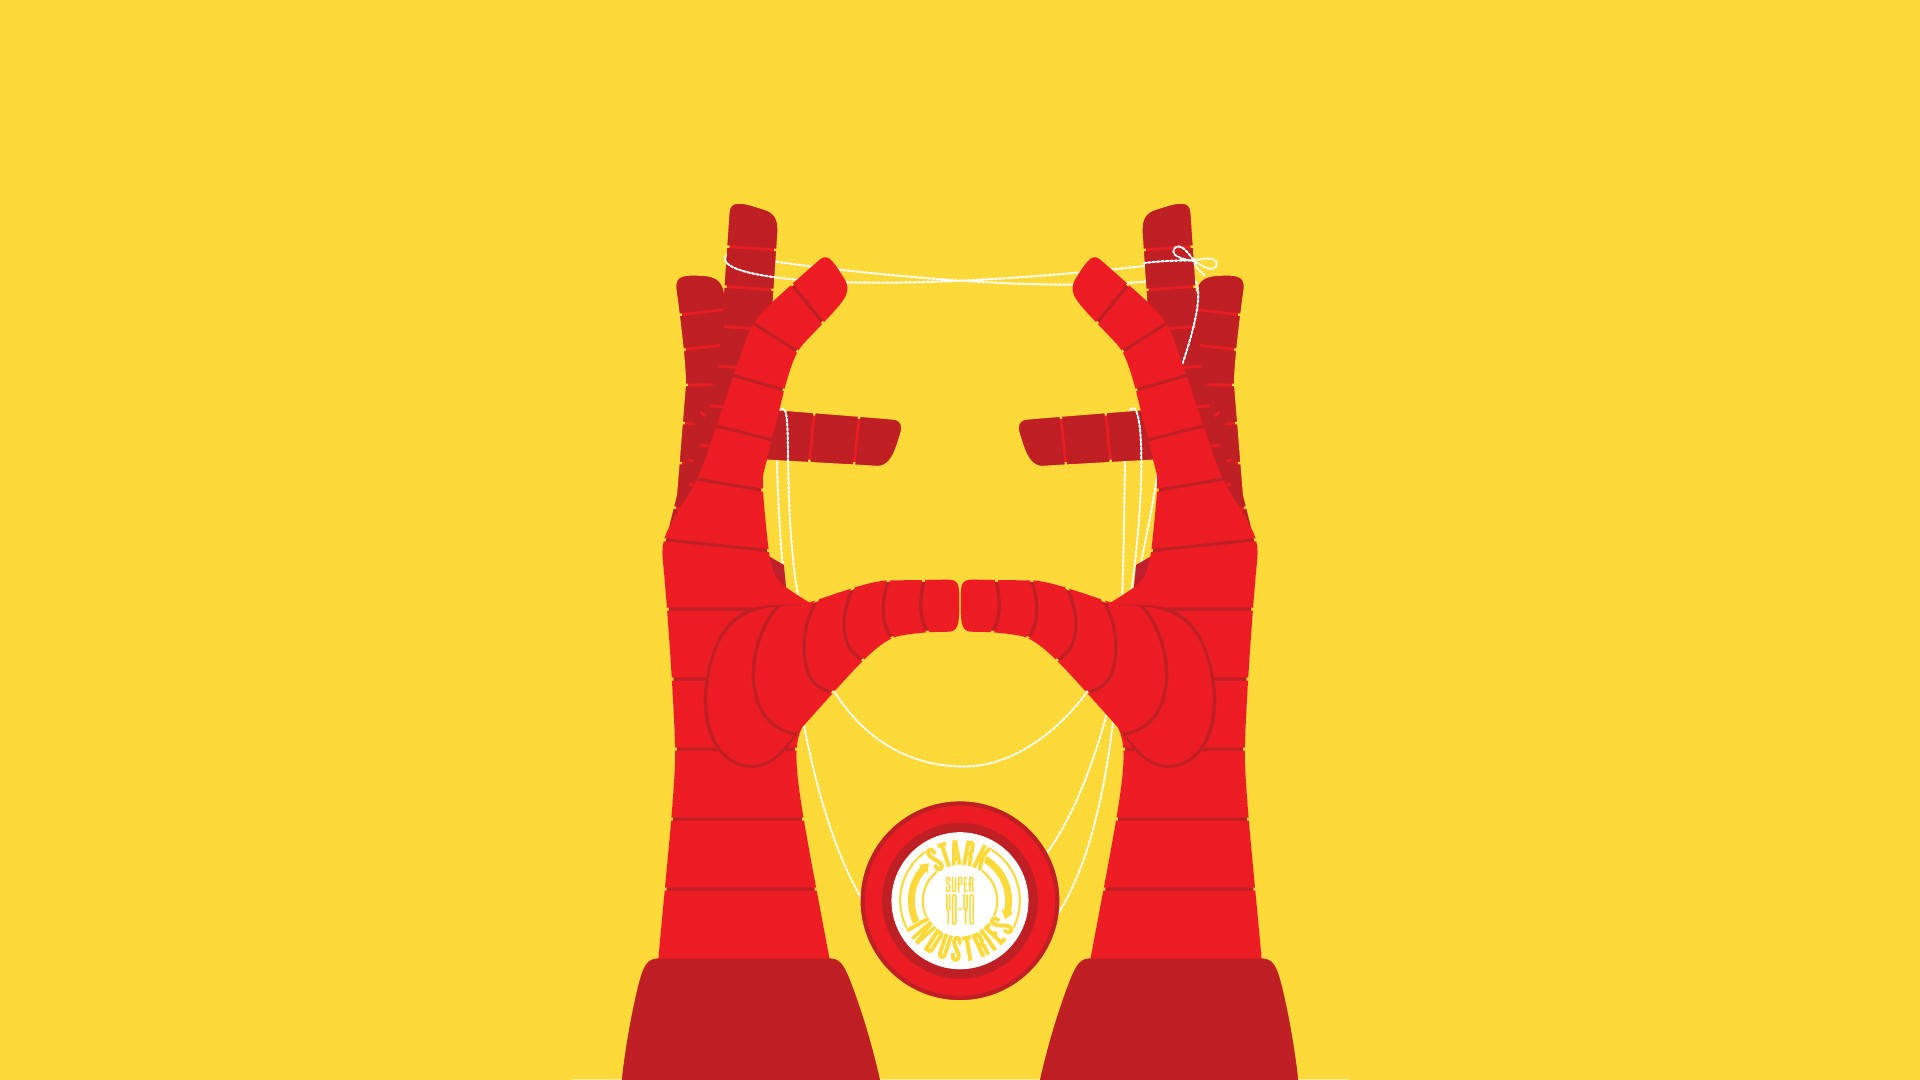 The Progressively Glowing Red Hand Of Iron Man Logo